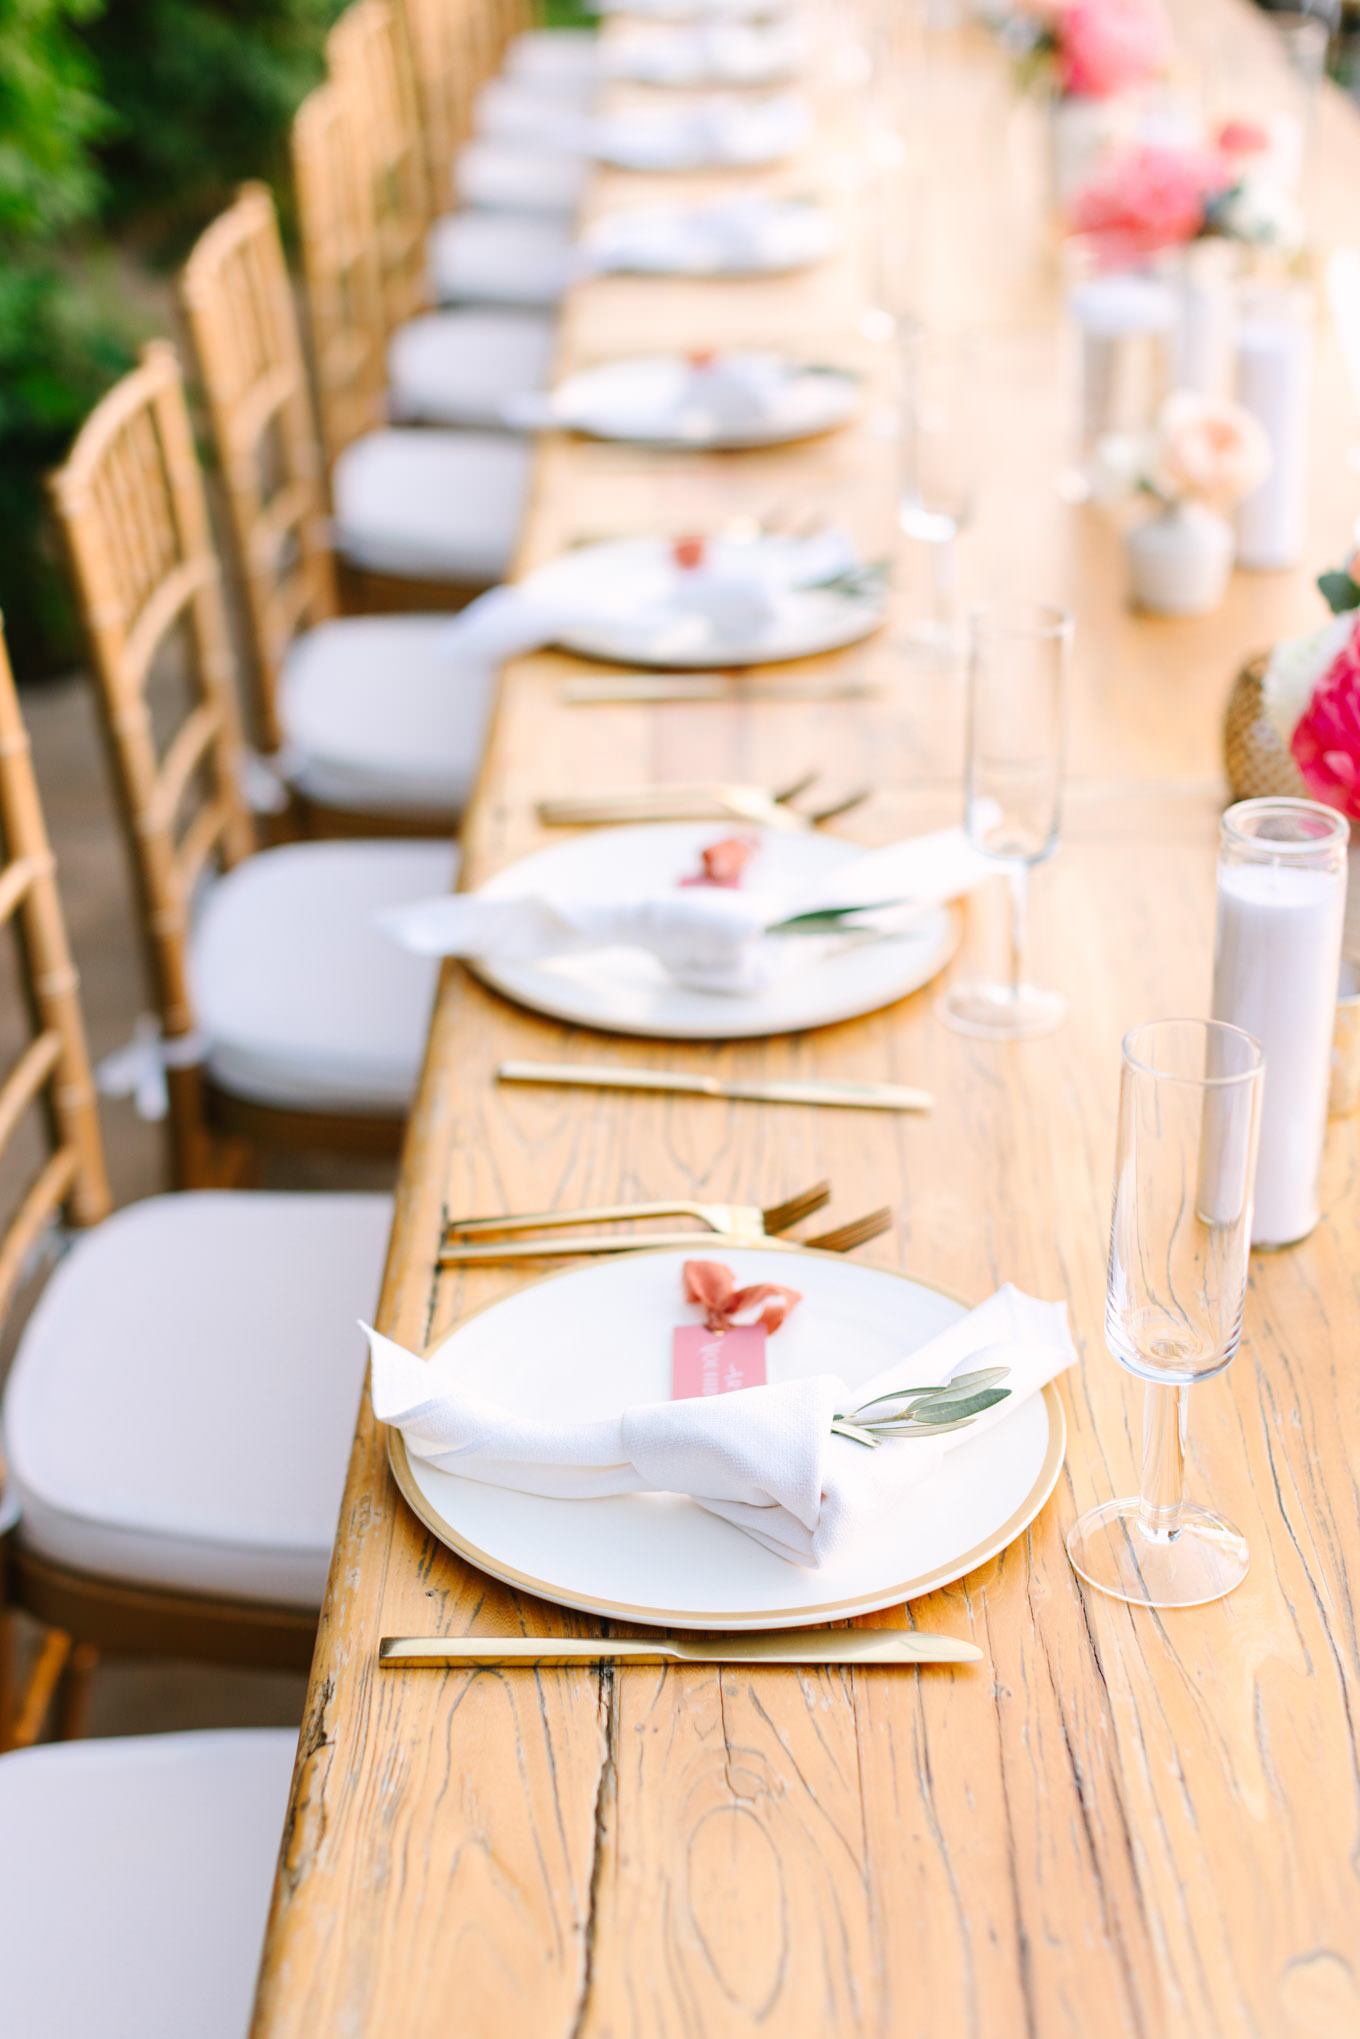 Reception dinnerware | Pink Bougainvillea Estate wedding | Colorful LA wedding photography | #bougainvilleaestate #palmspringswedding #palmspringsweddingvenue #palmspringsphotographer Source: Mary Costa Photography | Los Angeles